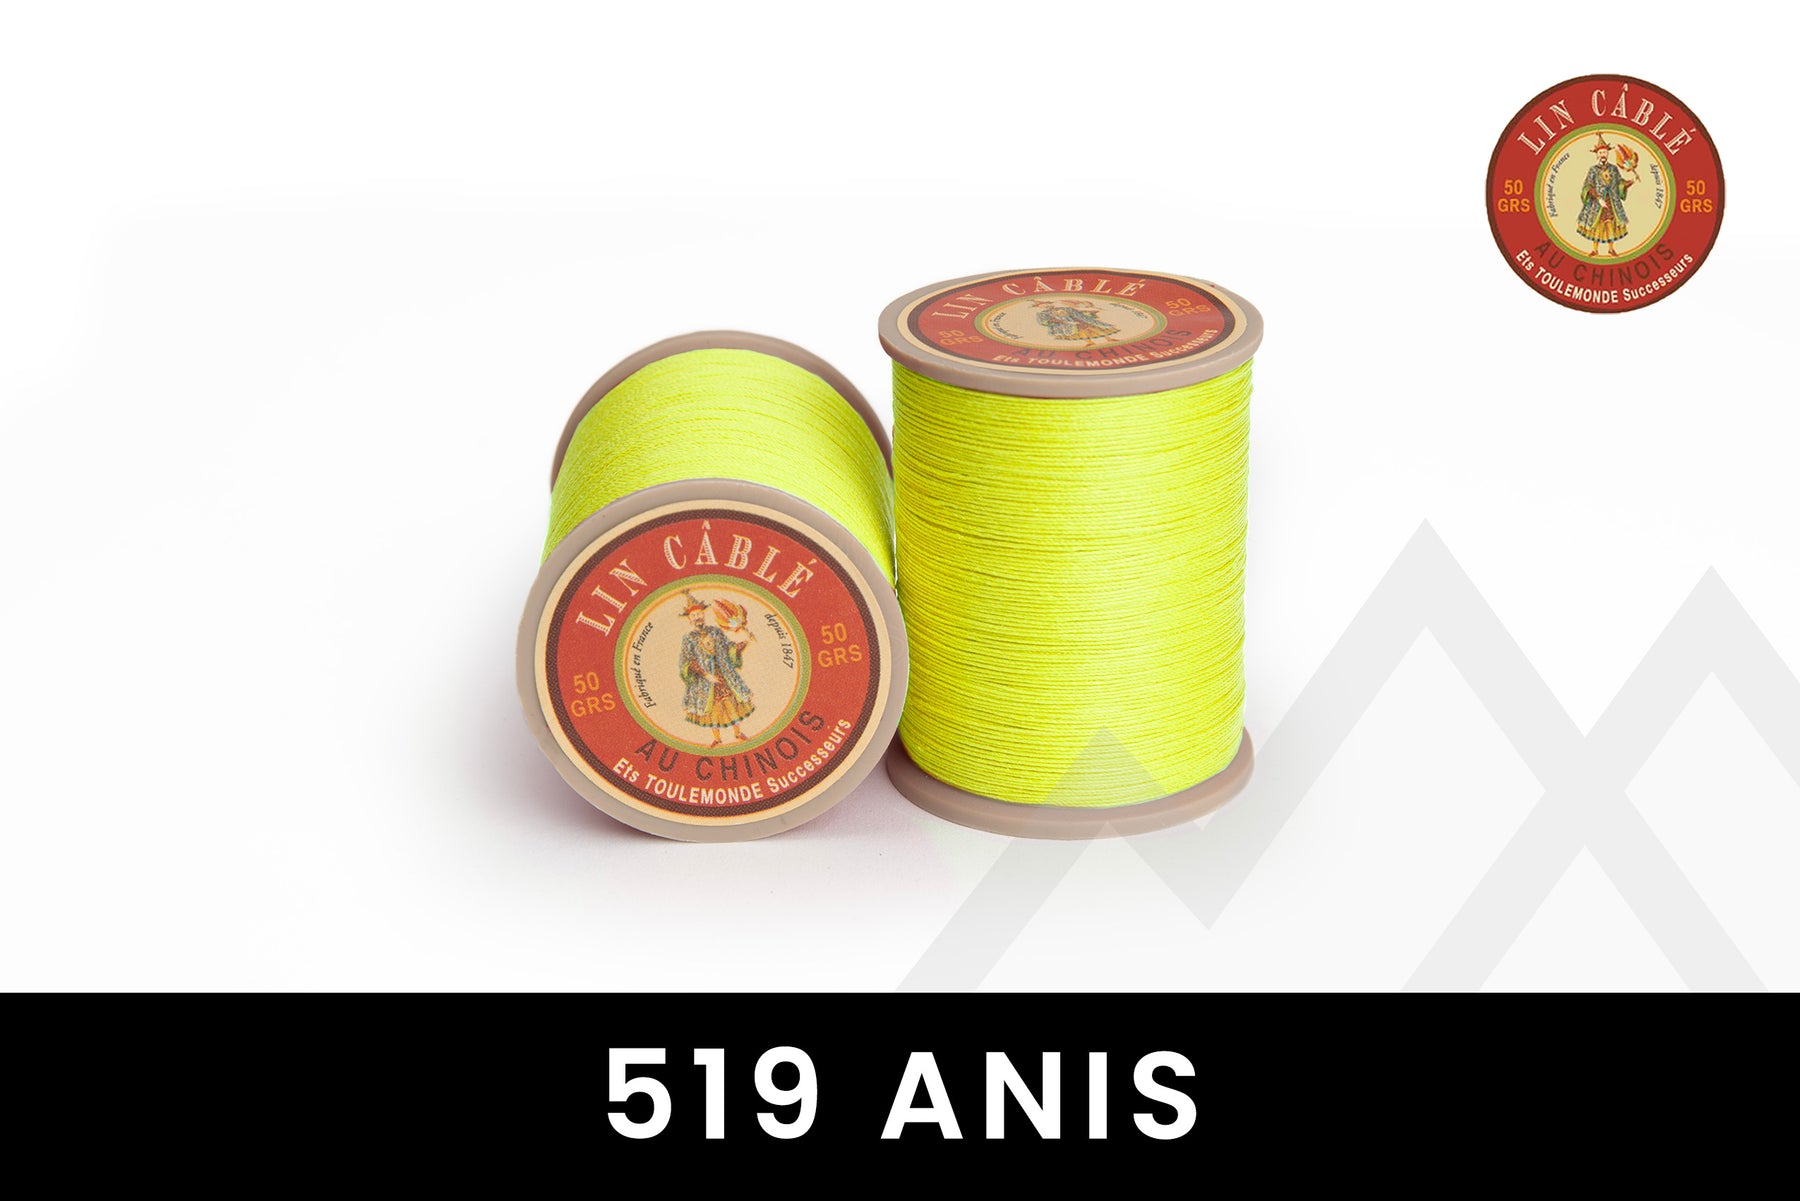 Fil au Chinois 🇫🇷 - "Lin Cable" Waxed Linen Thread (Size 332) *Full Spool